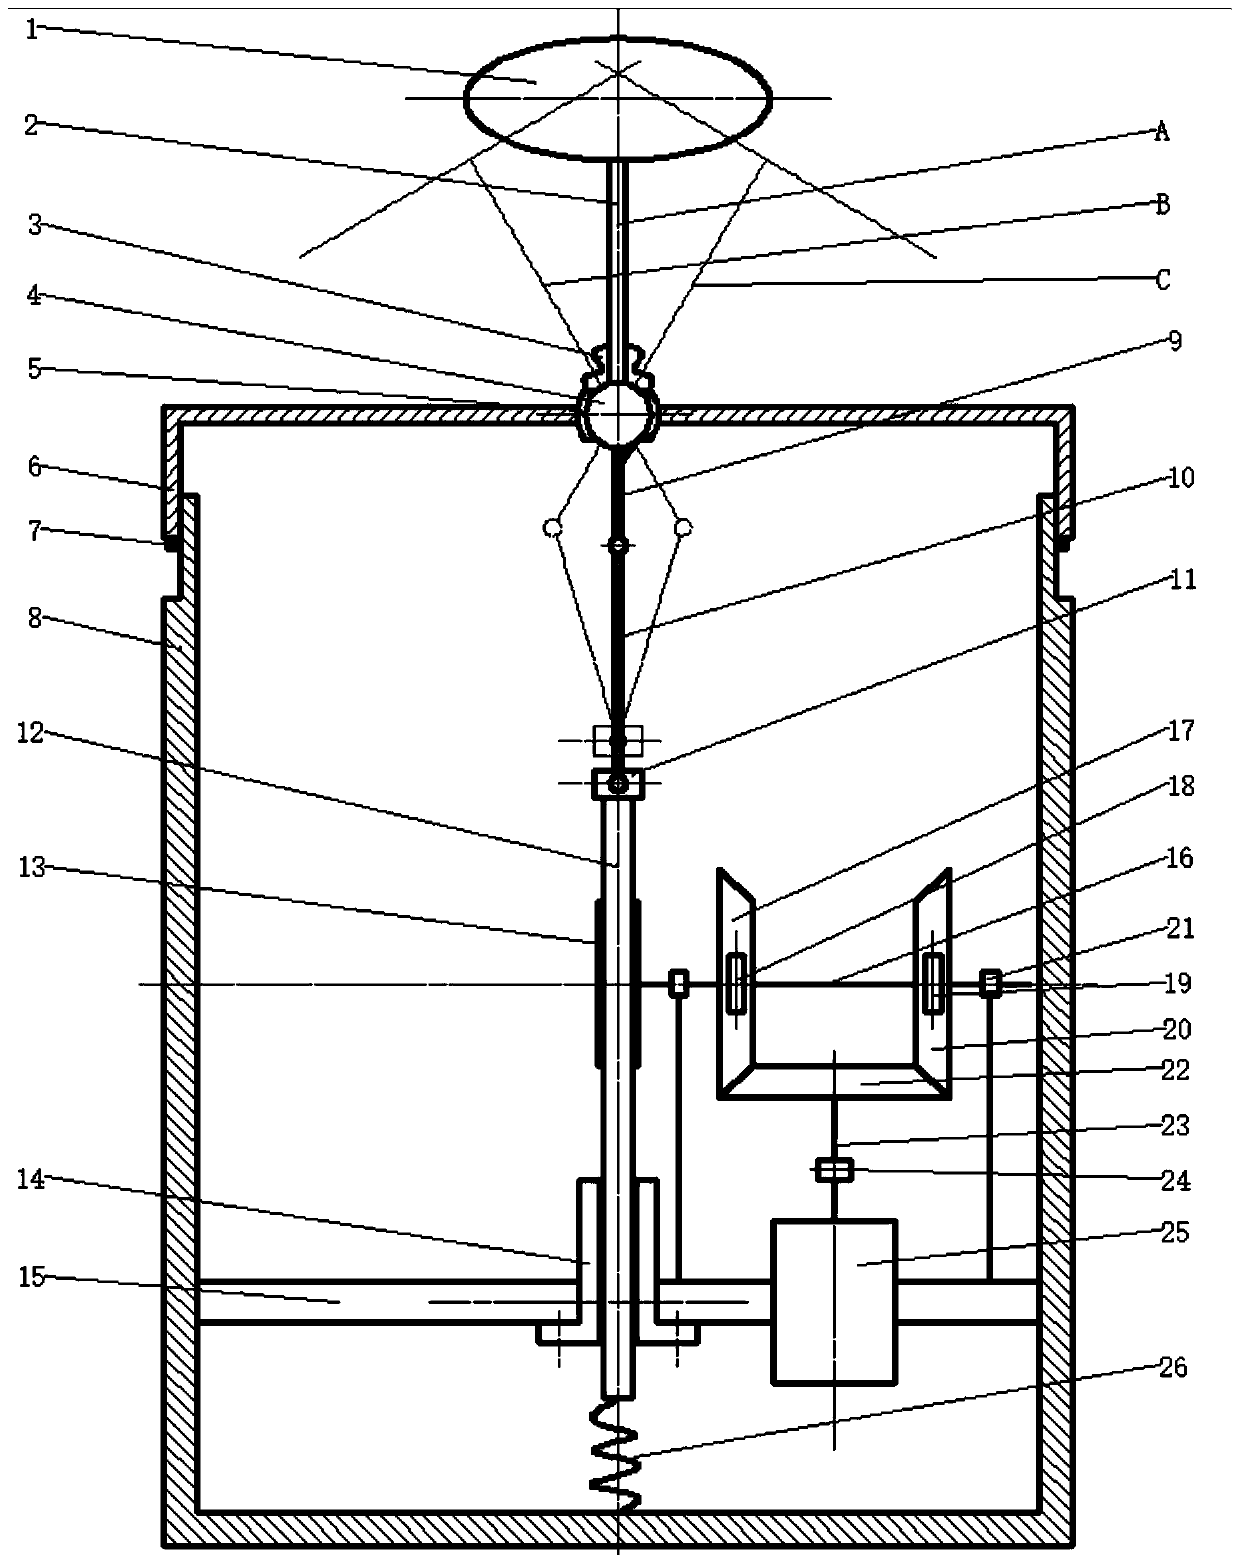 Oscillating wave energy generation system and aircraft